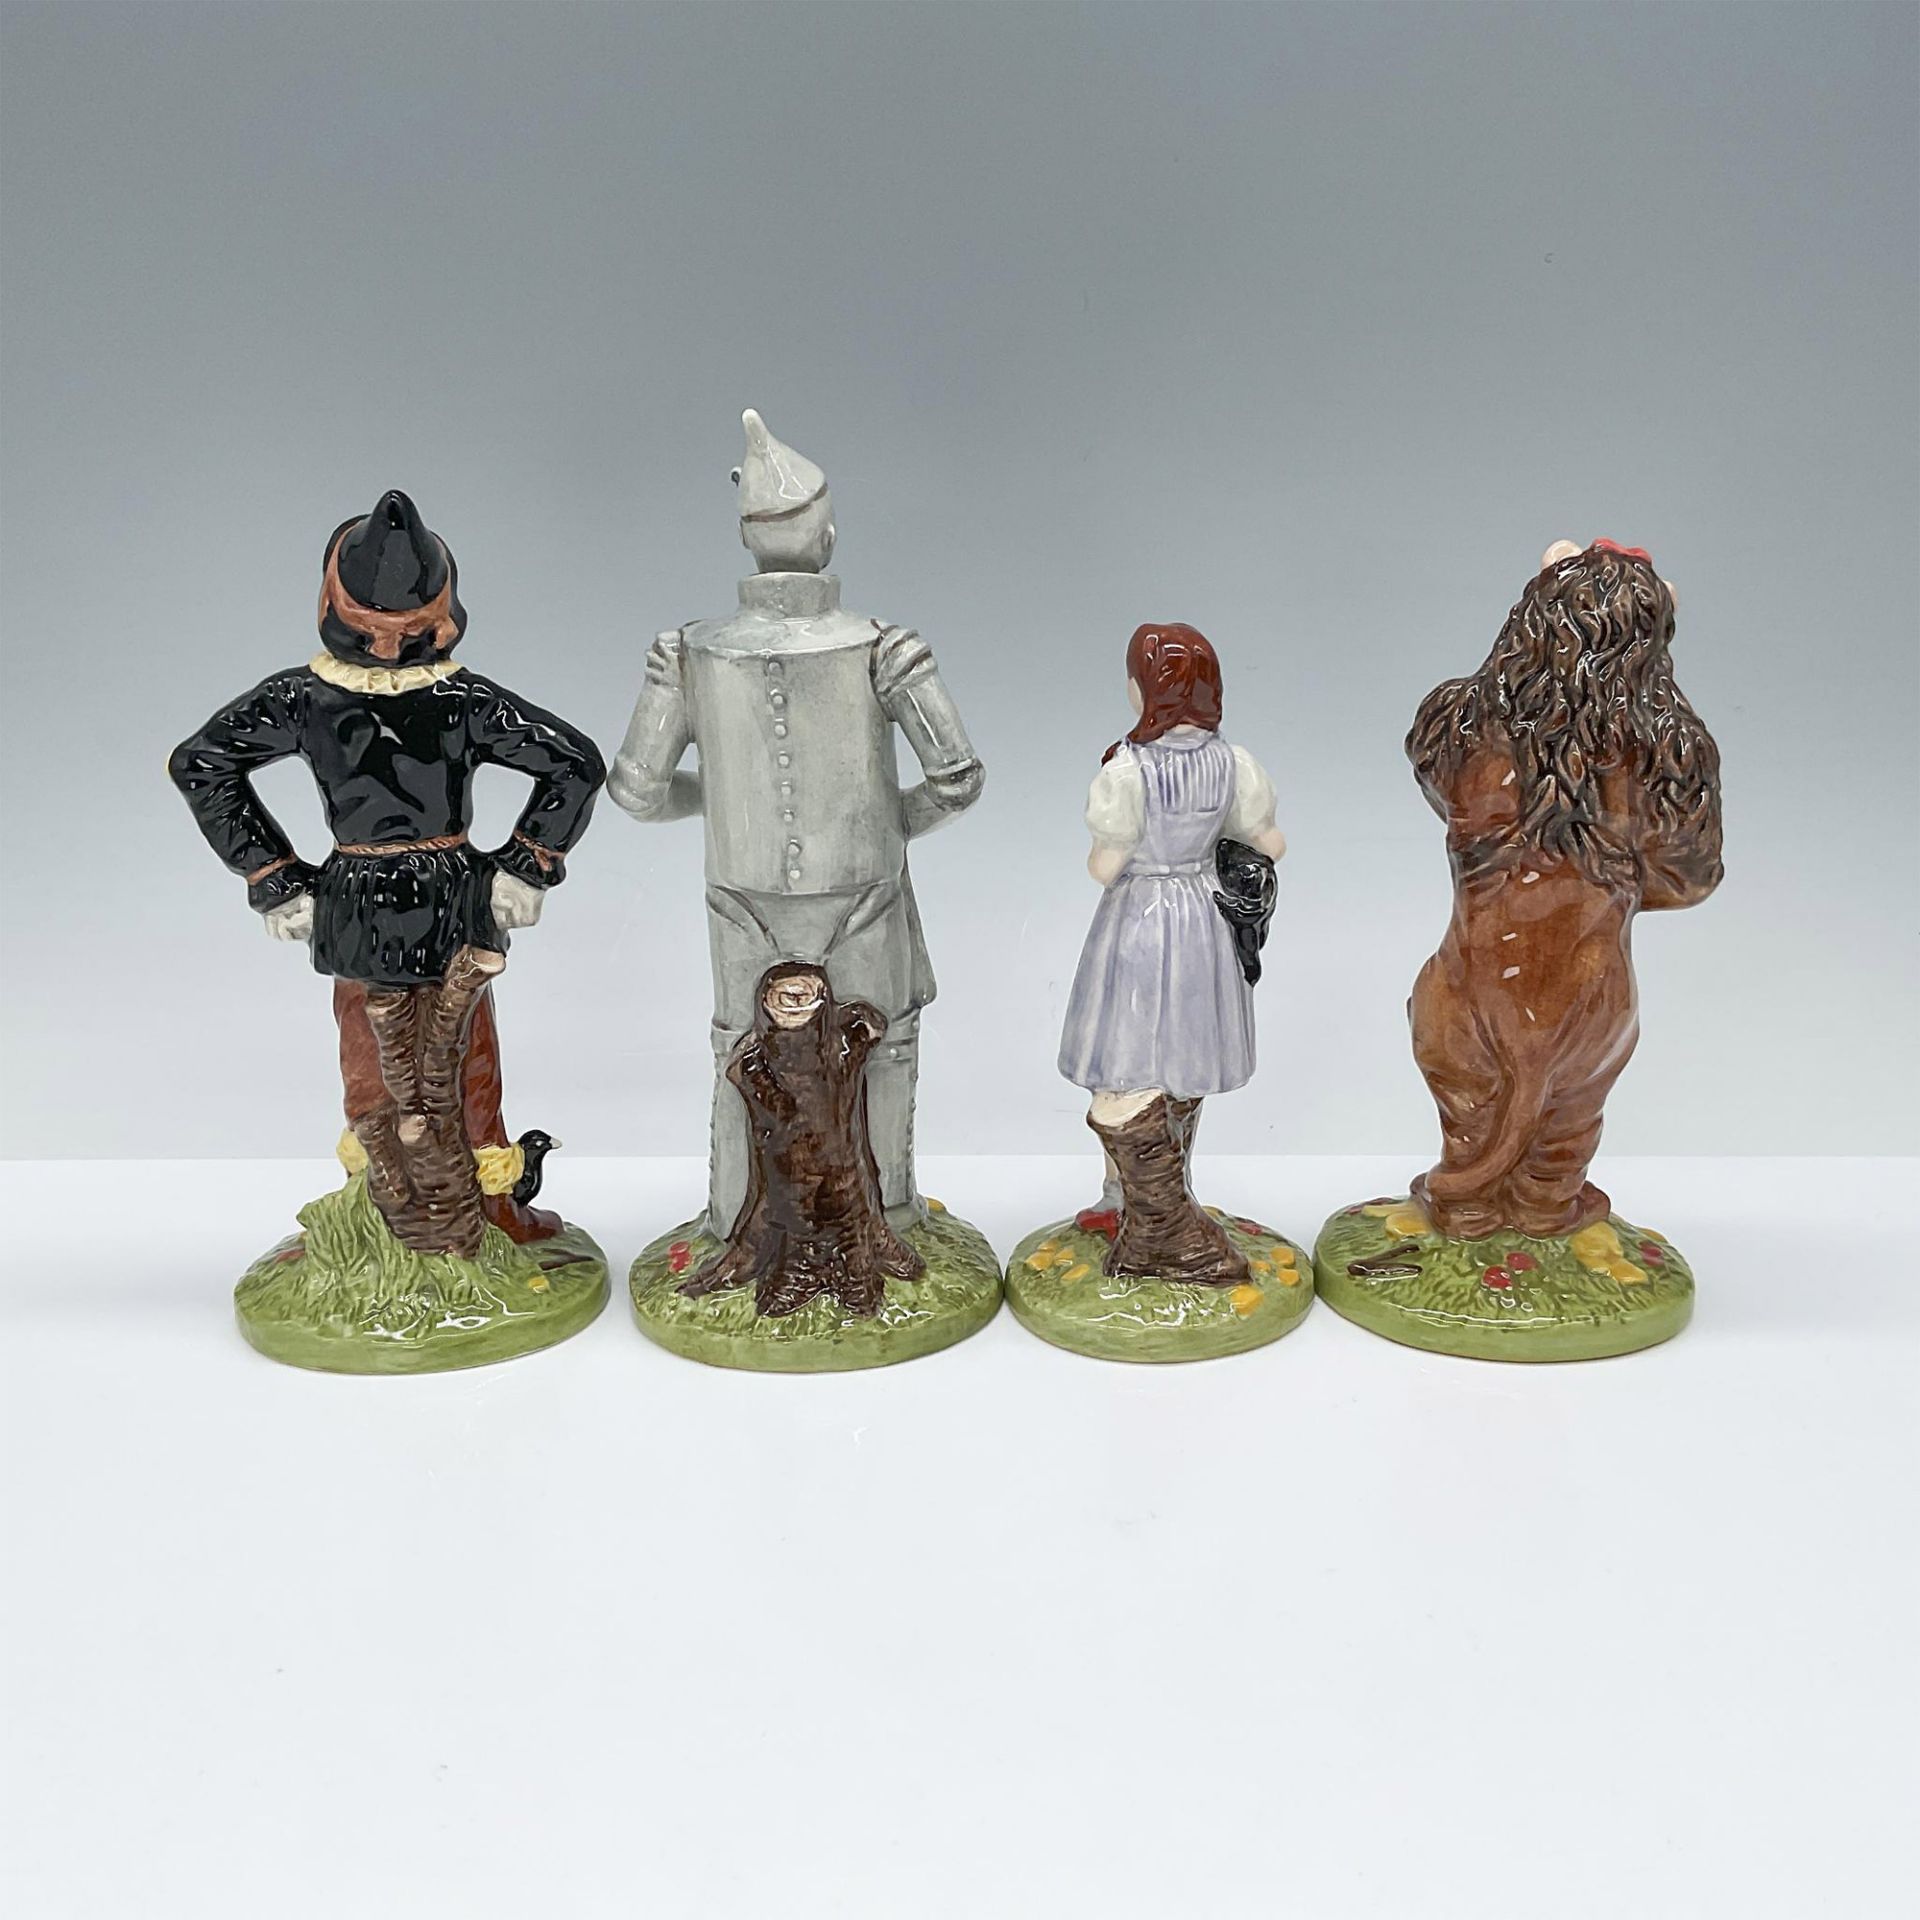 4pc Royal Doulton Figurine Grouping, Wizard of Oz - Image 2 of 3